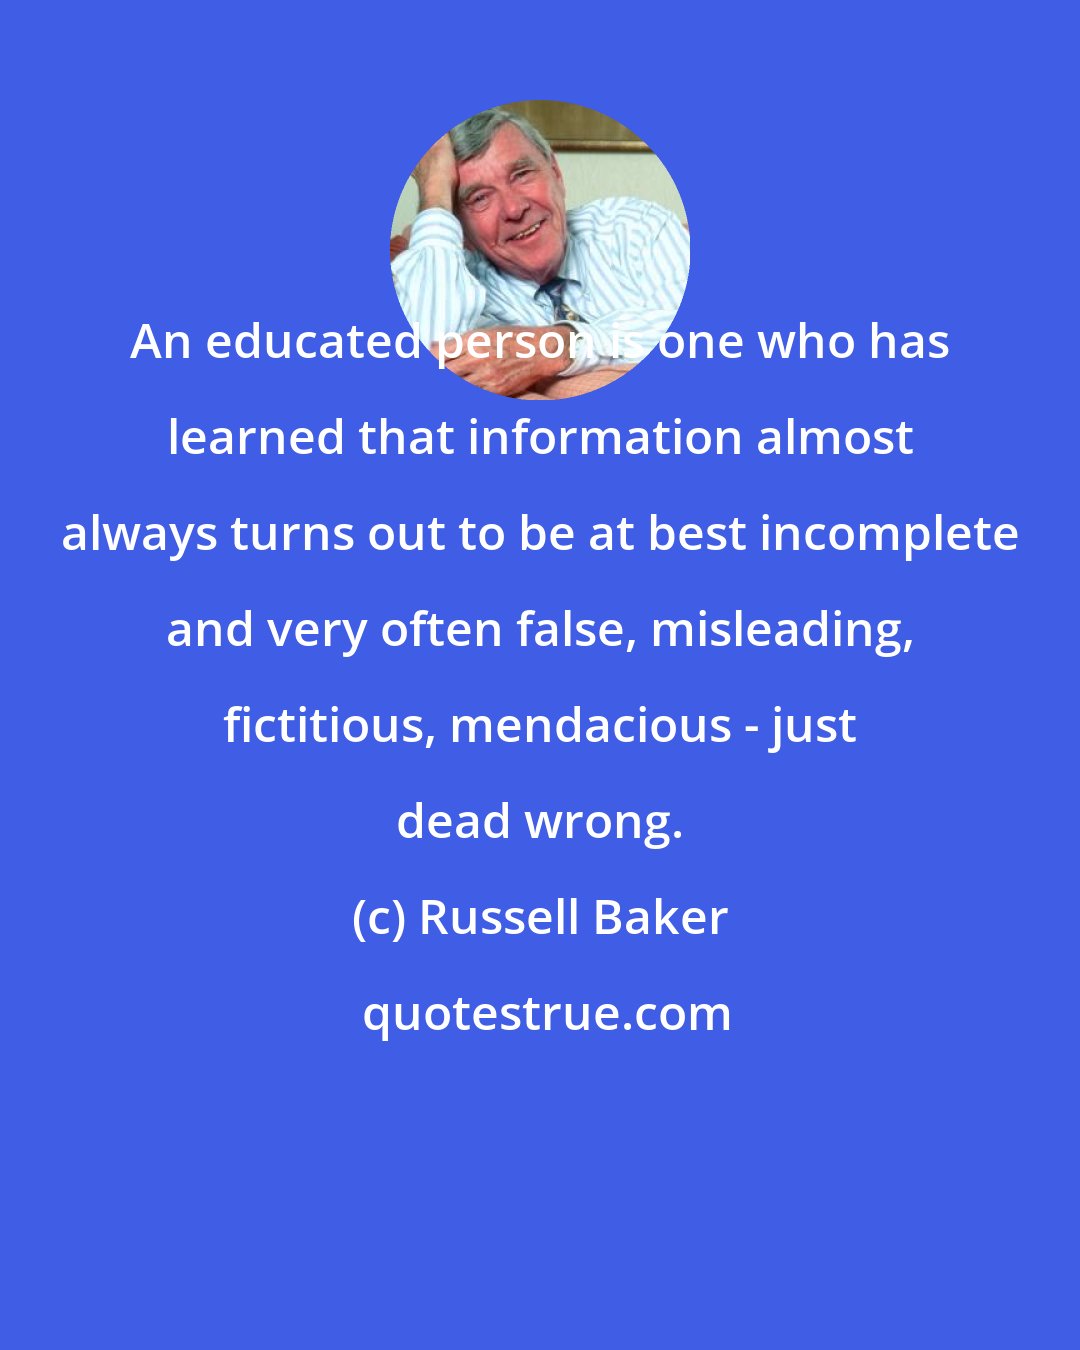 Russell Baker: An educated person is one who has learned that information almost always turns out to be at best incomplete and very often false, misleading, fictitious, mendacious - just dead wrong.